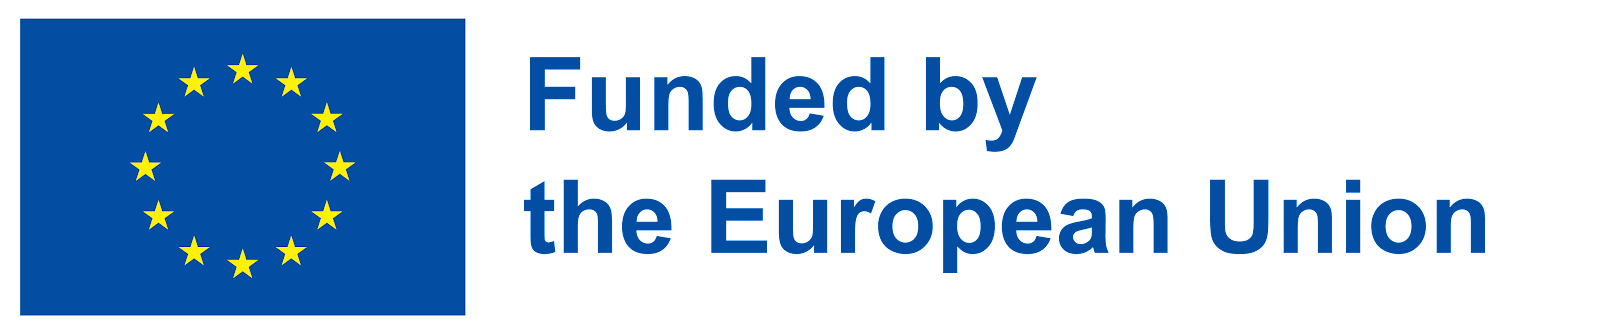 Funded by the European Union